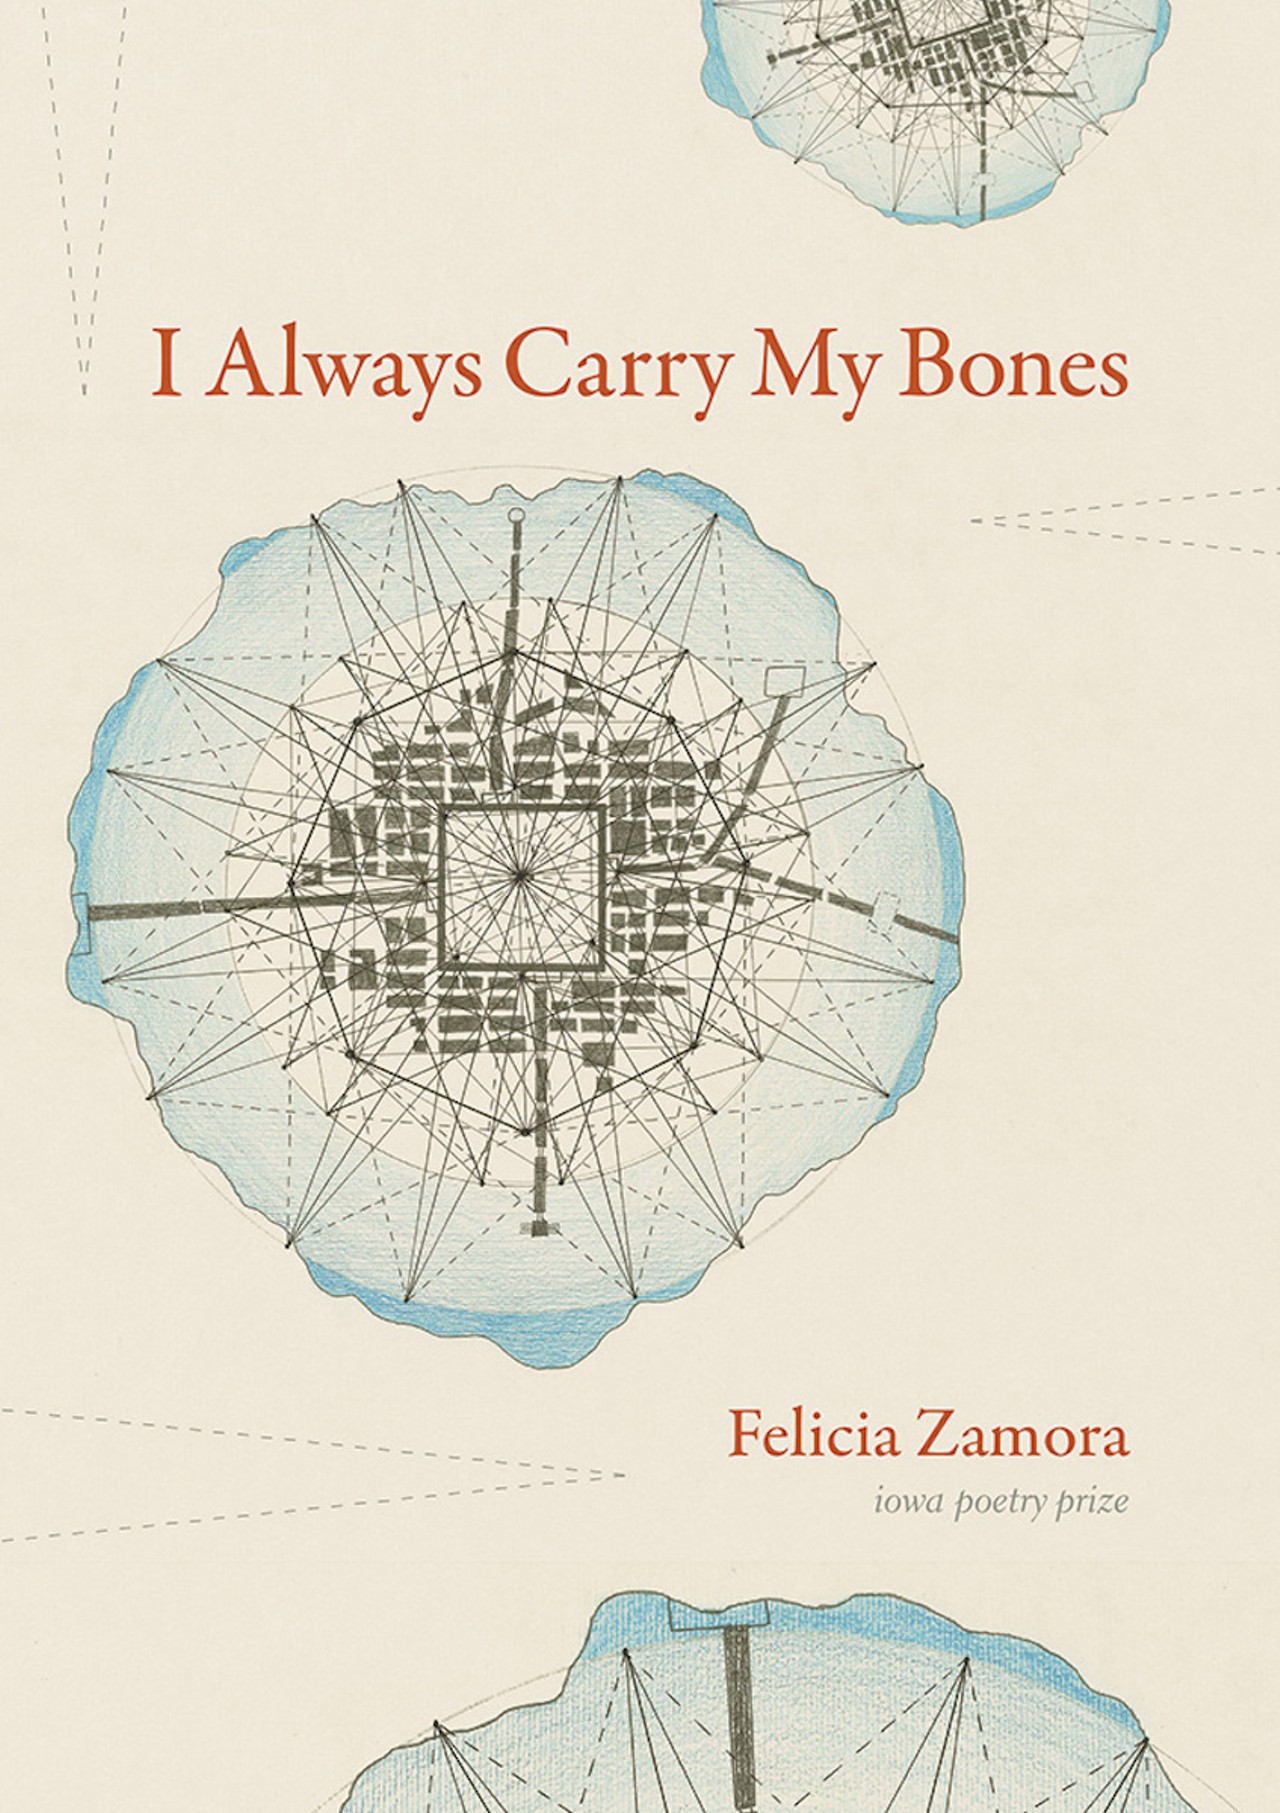 I Always Carry My Bones by Felicia Zamora 
Make your summer a Cincinnati-Ohioana triple threat with Felicia Zamora’s I Always Carry My Bones, another collection of poetry. Zamora is an assistant professor of poetry at the University of Cincinnati and associate poetry editor for Colorado Review.